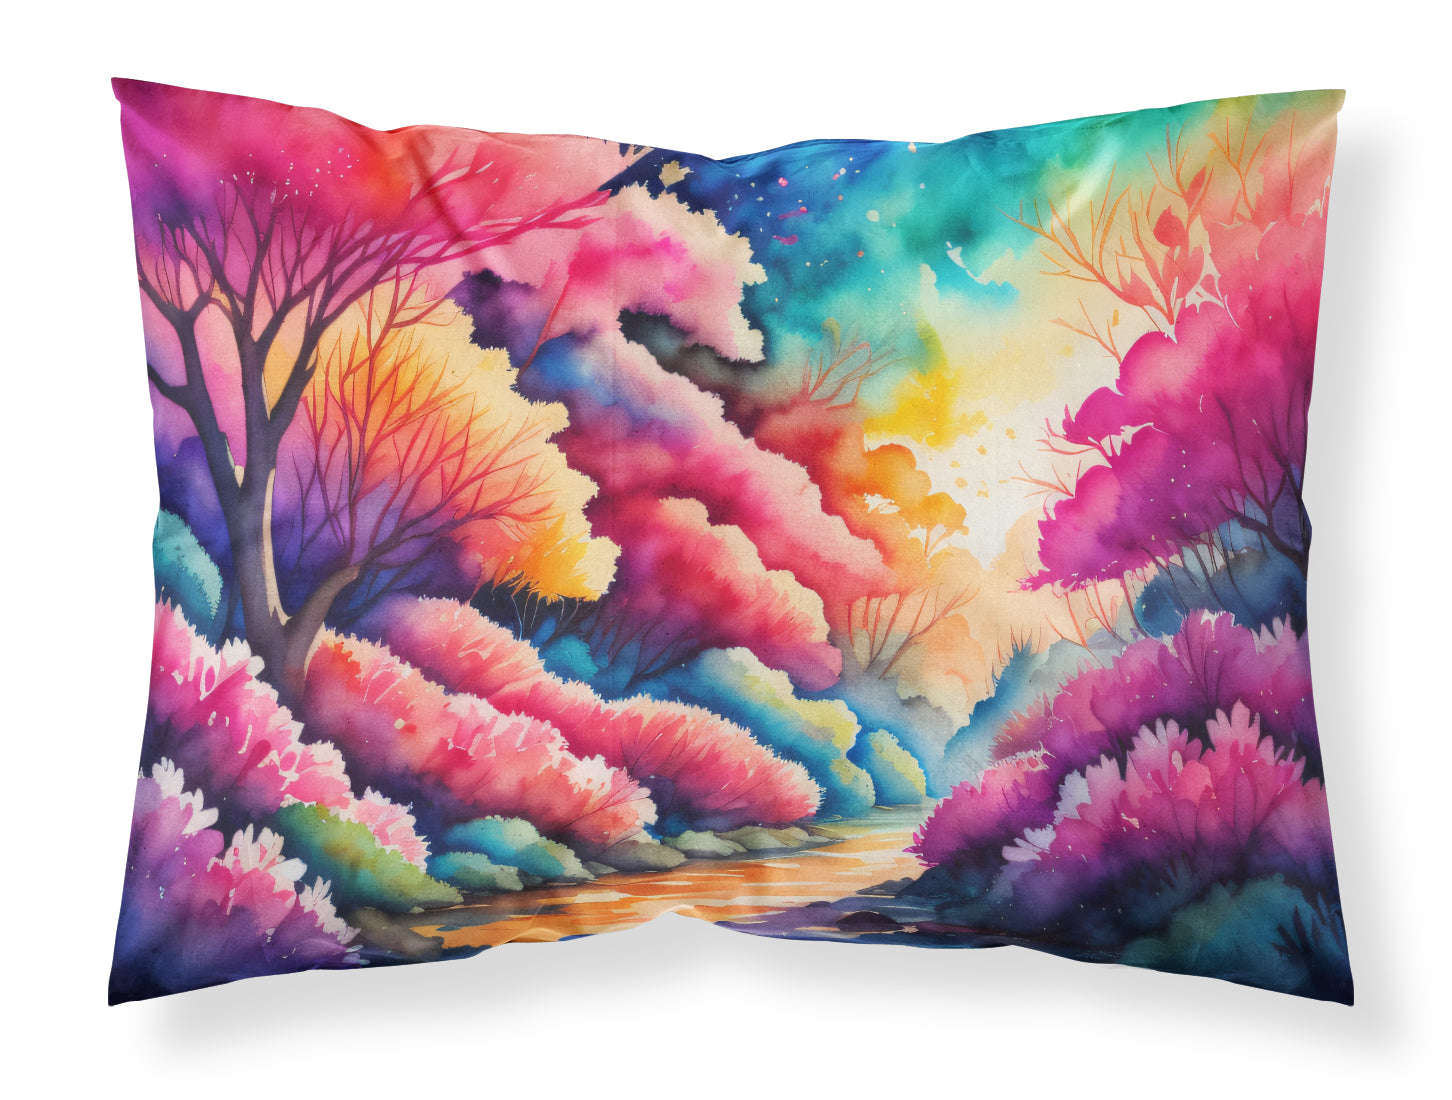 Buy this Azaleas in Color Fabric Standard Pillowcase